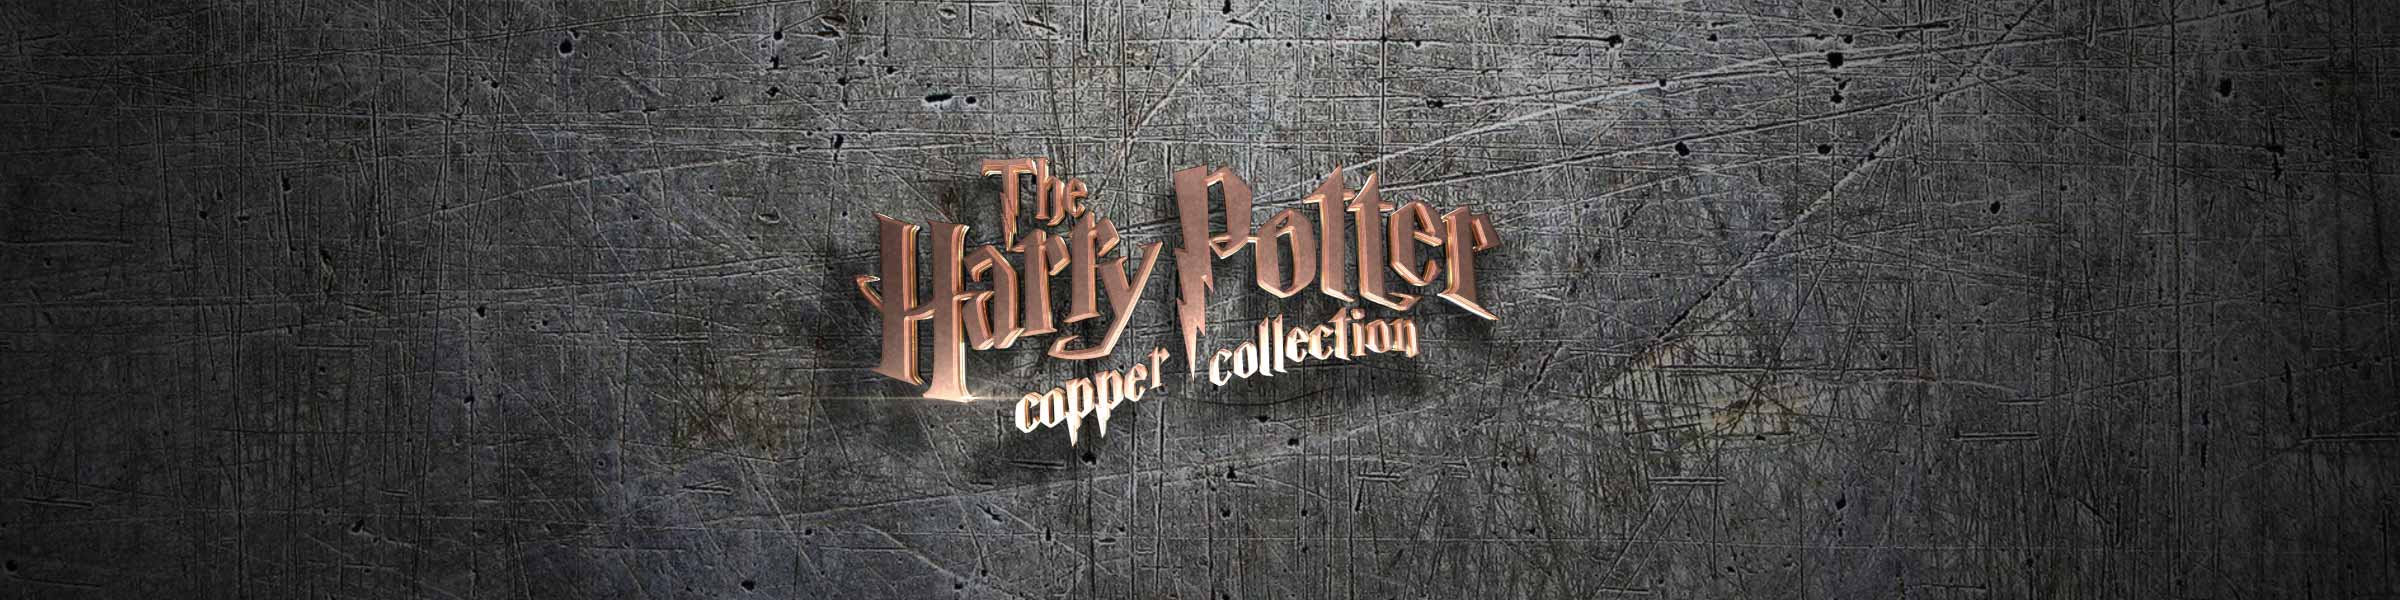 Harry Potter Copper Pin Collection Promotion